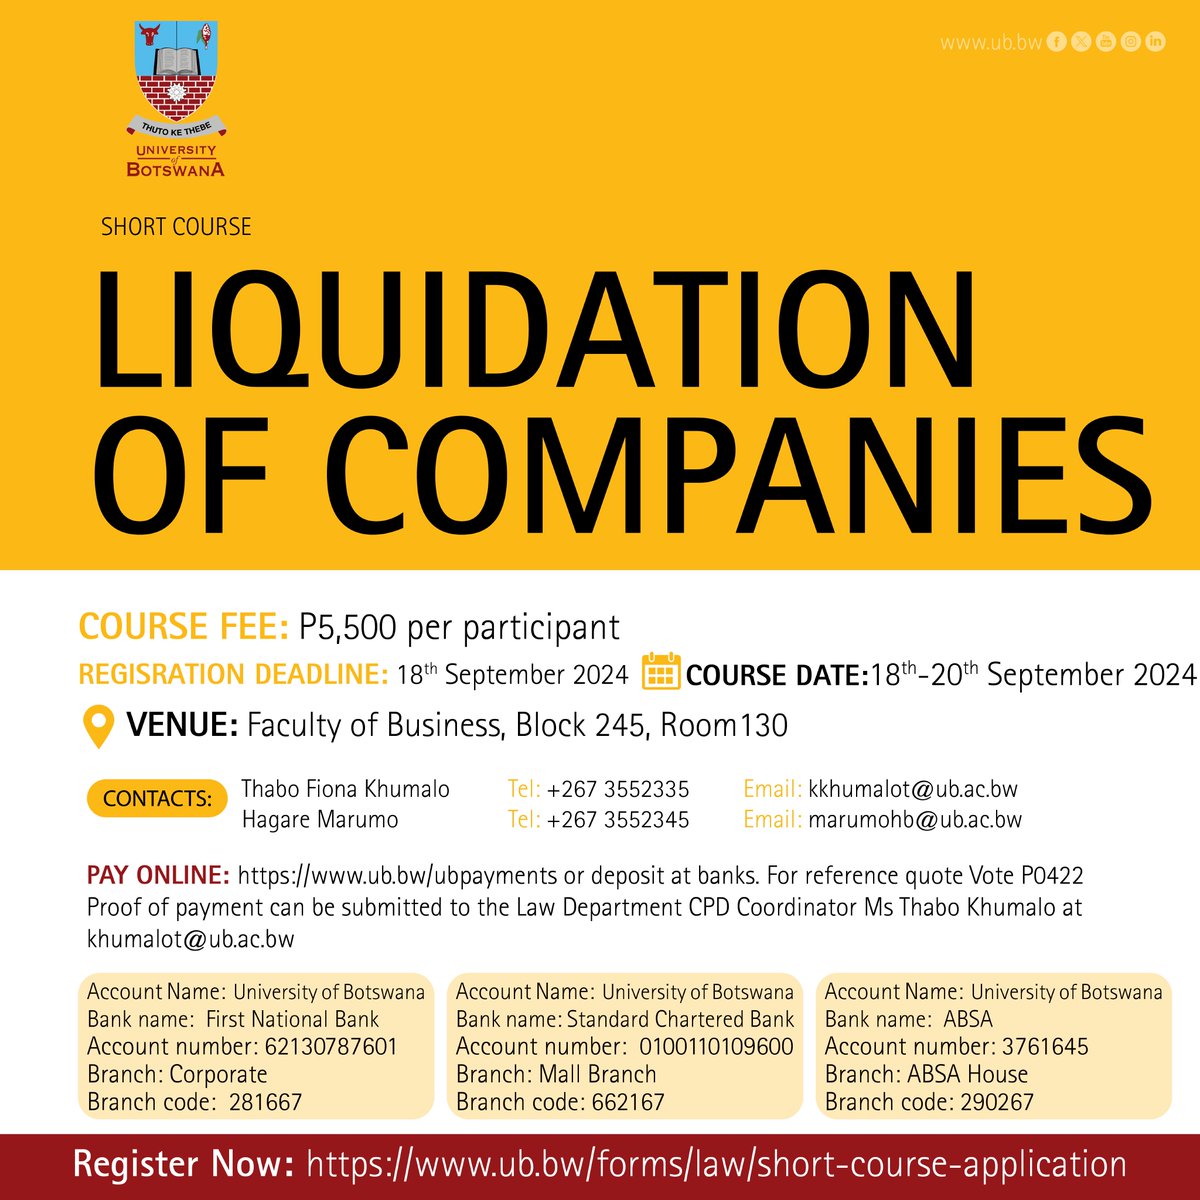 #ShortCourse
Liquidation of Companies
Register Now: ub.bw/forms/law/shor…